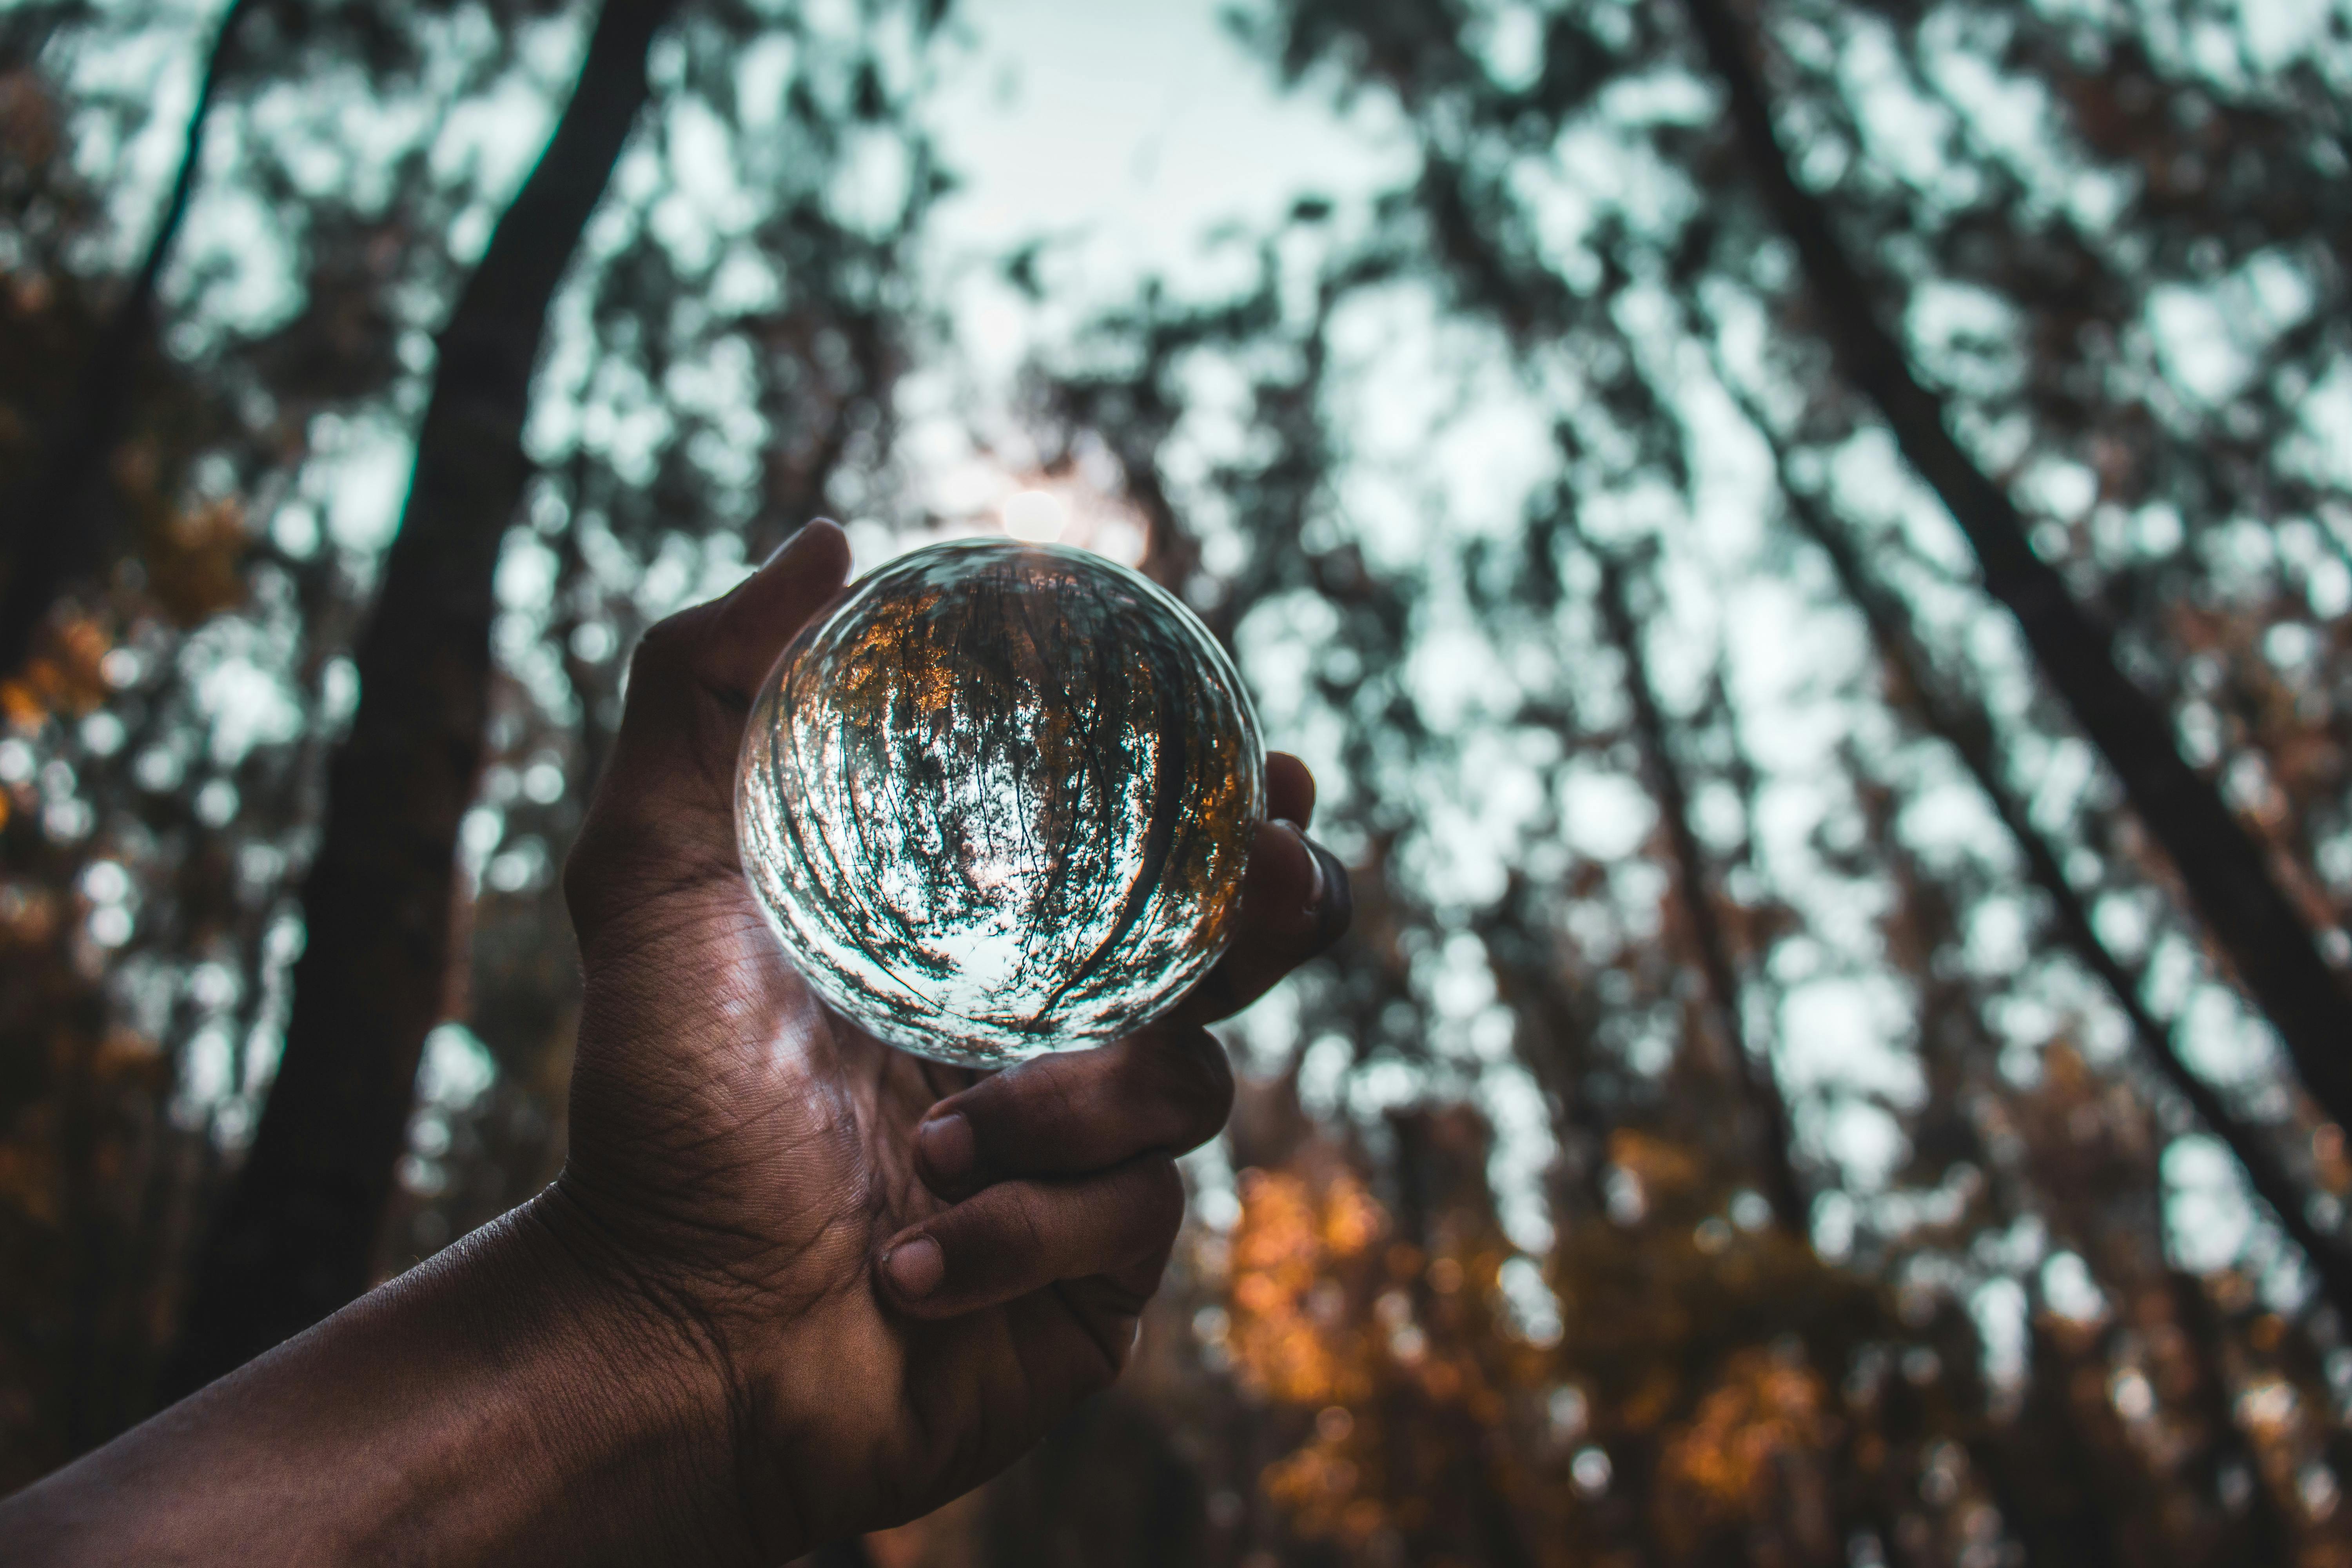 Crystal ball held up to trees and sunlight